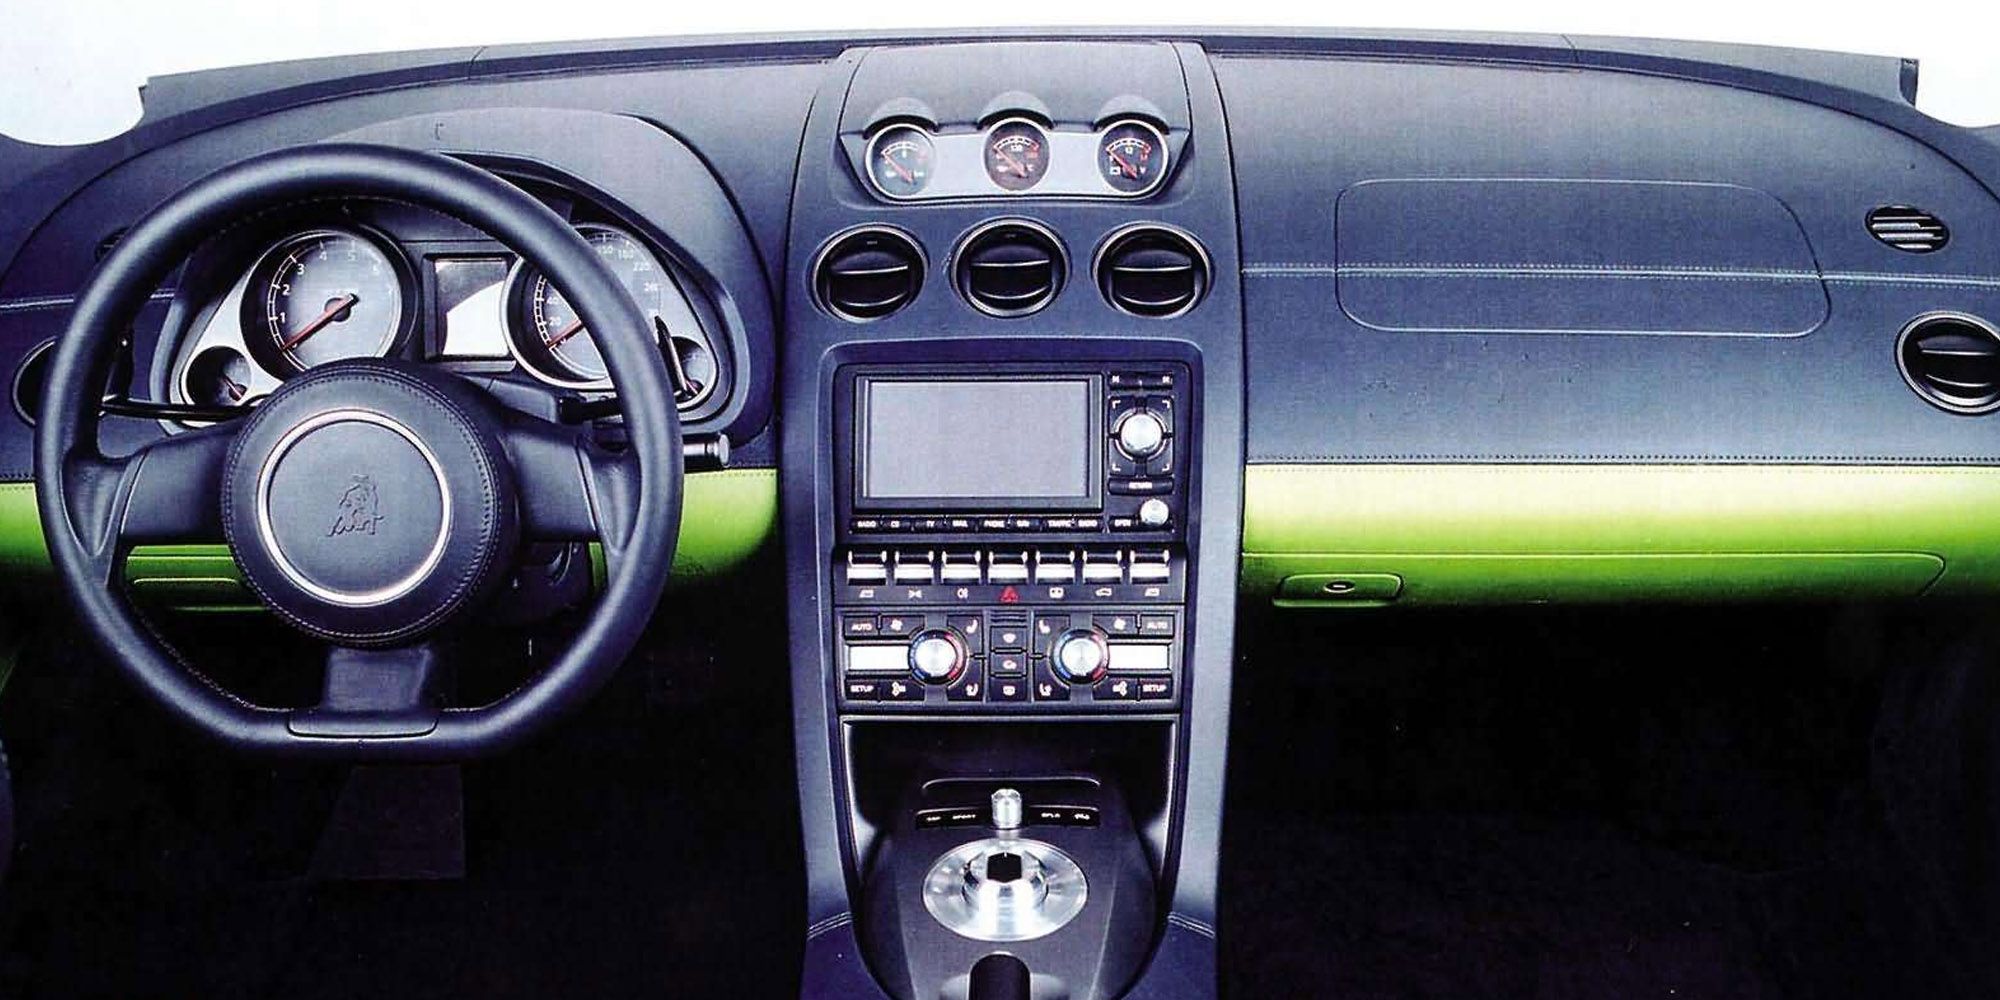 The interior of the Gallardo, black and green leather